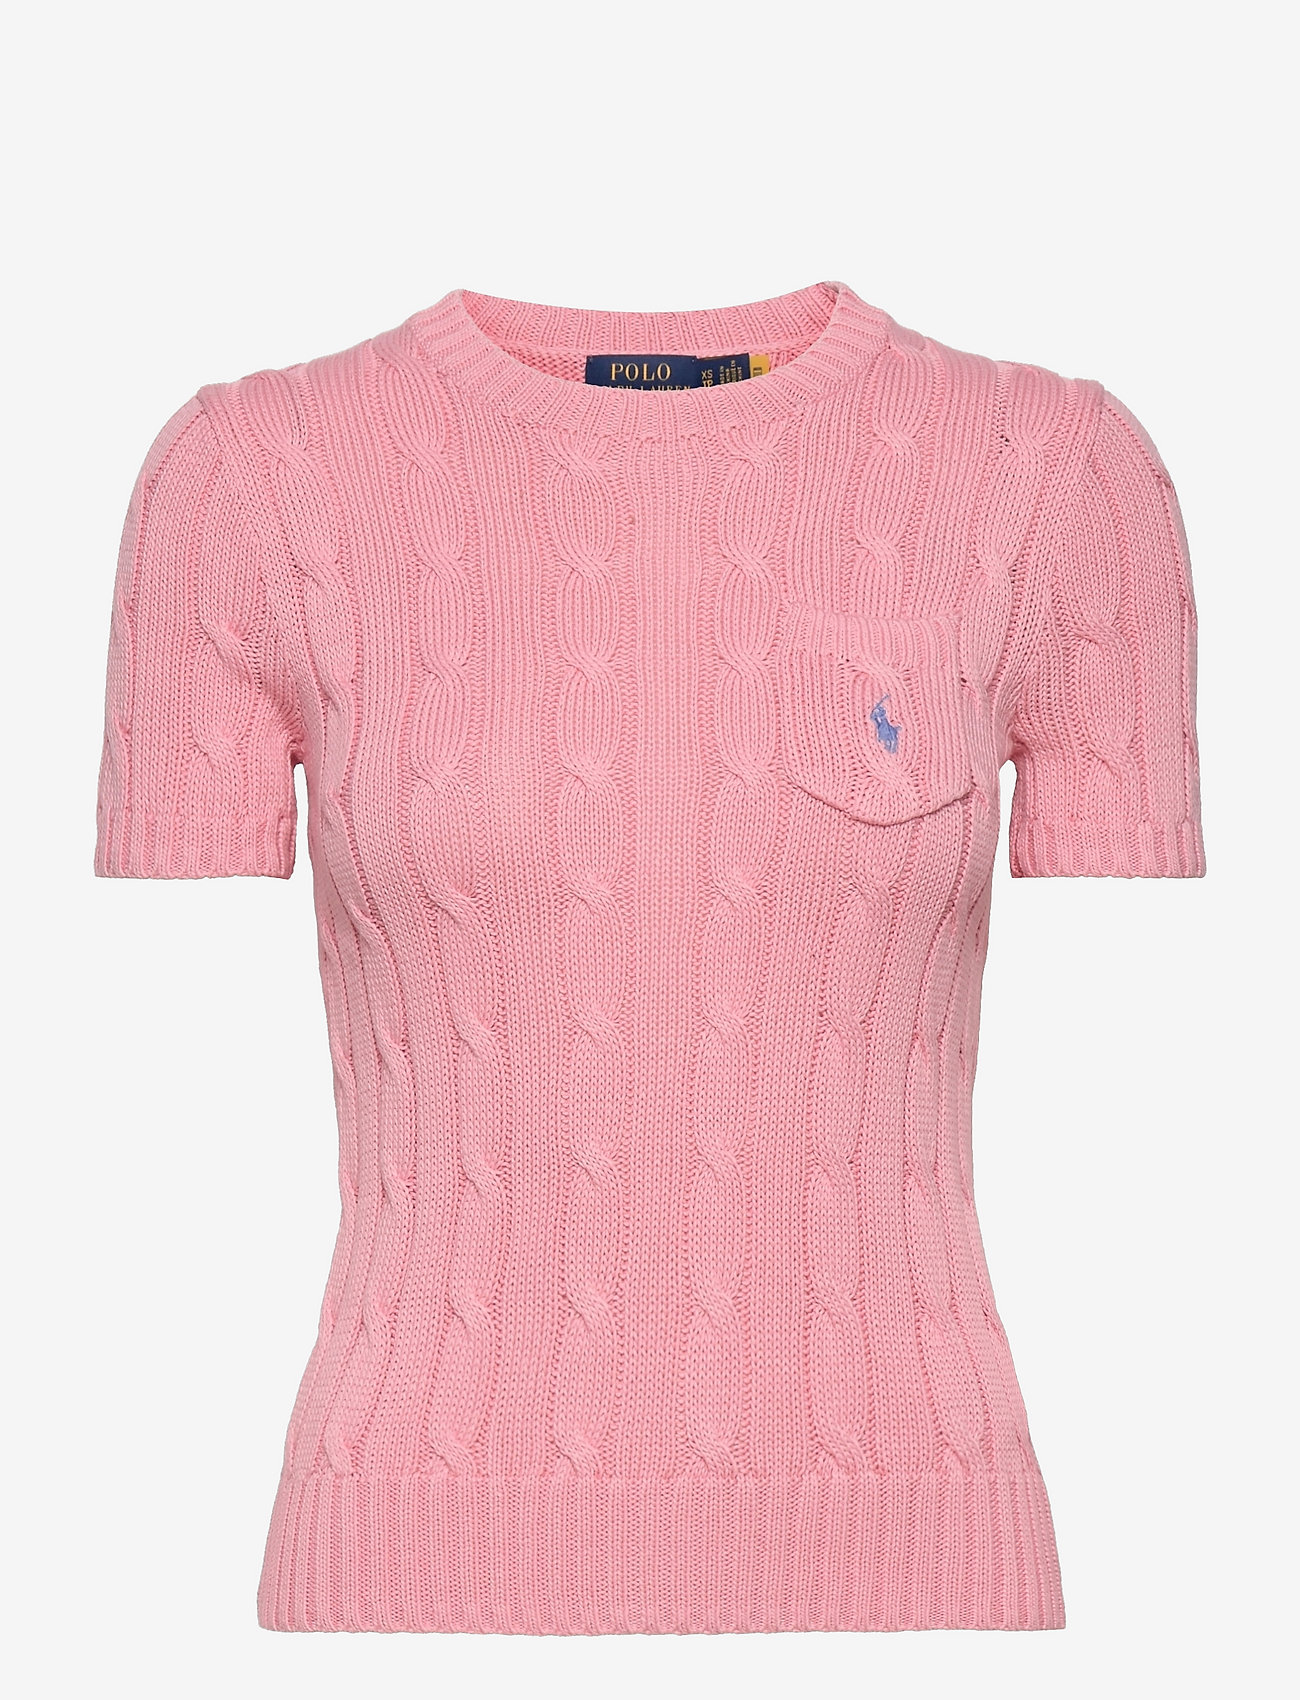 Polo Ralph Lauren - Cable-Knit Short-Sleeve Sweater - jumpers - carmel pink - 0